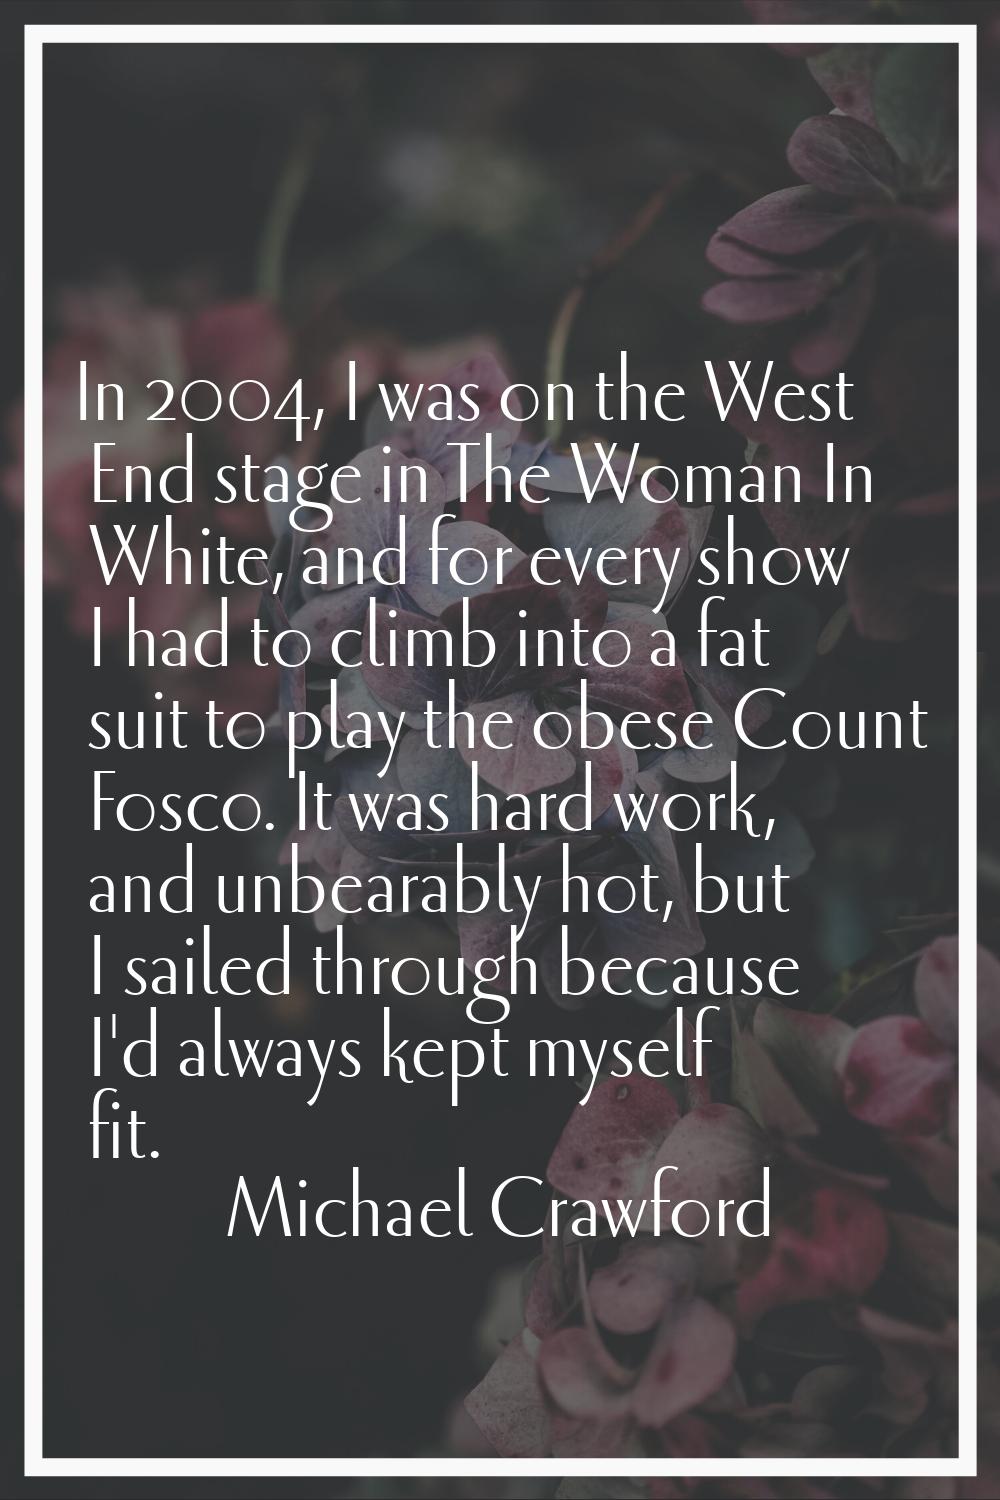 In 2004, I was on the West End stage in The Woman In White, and for every show I had to climb into 